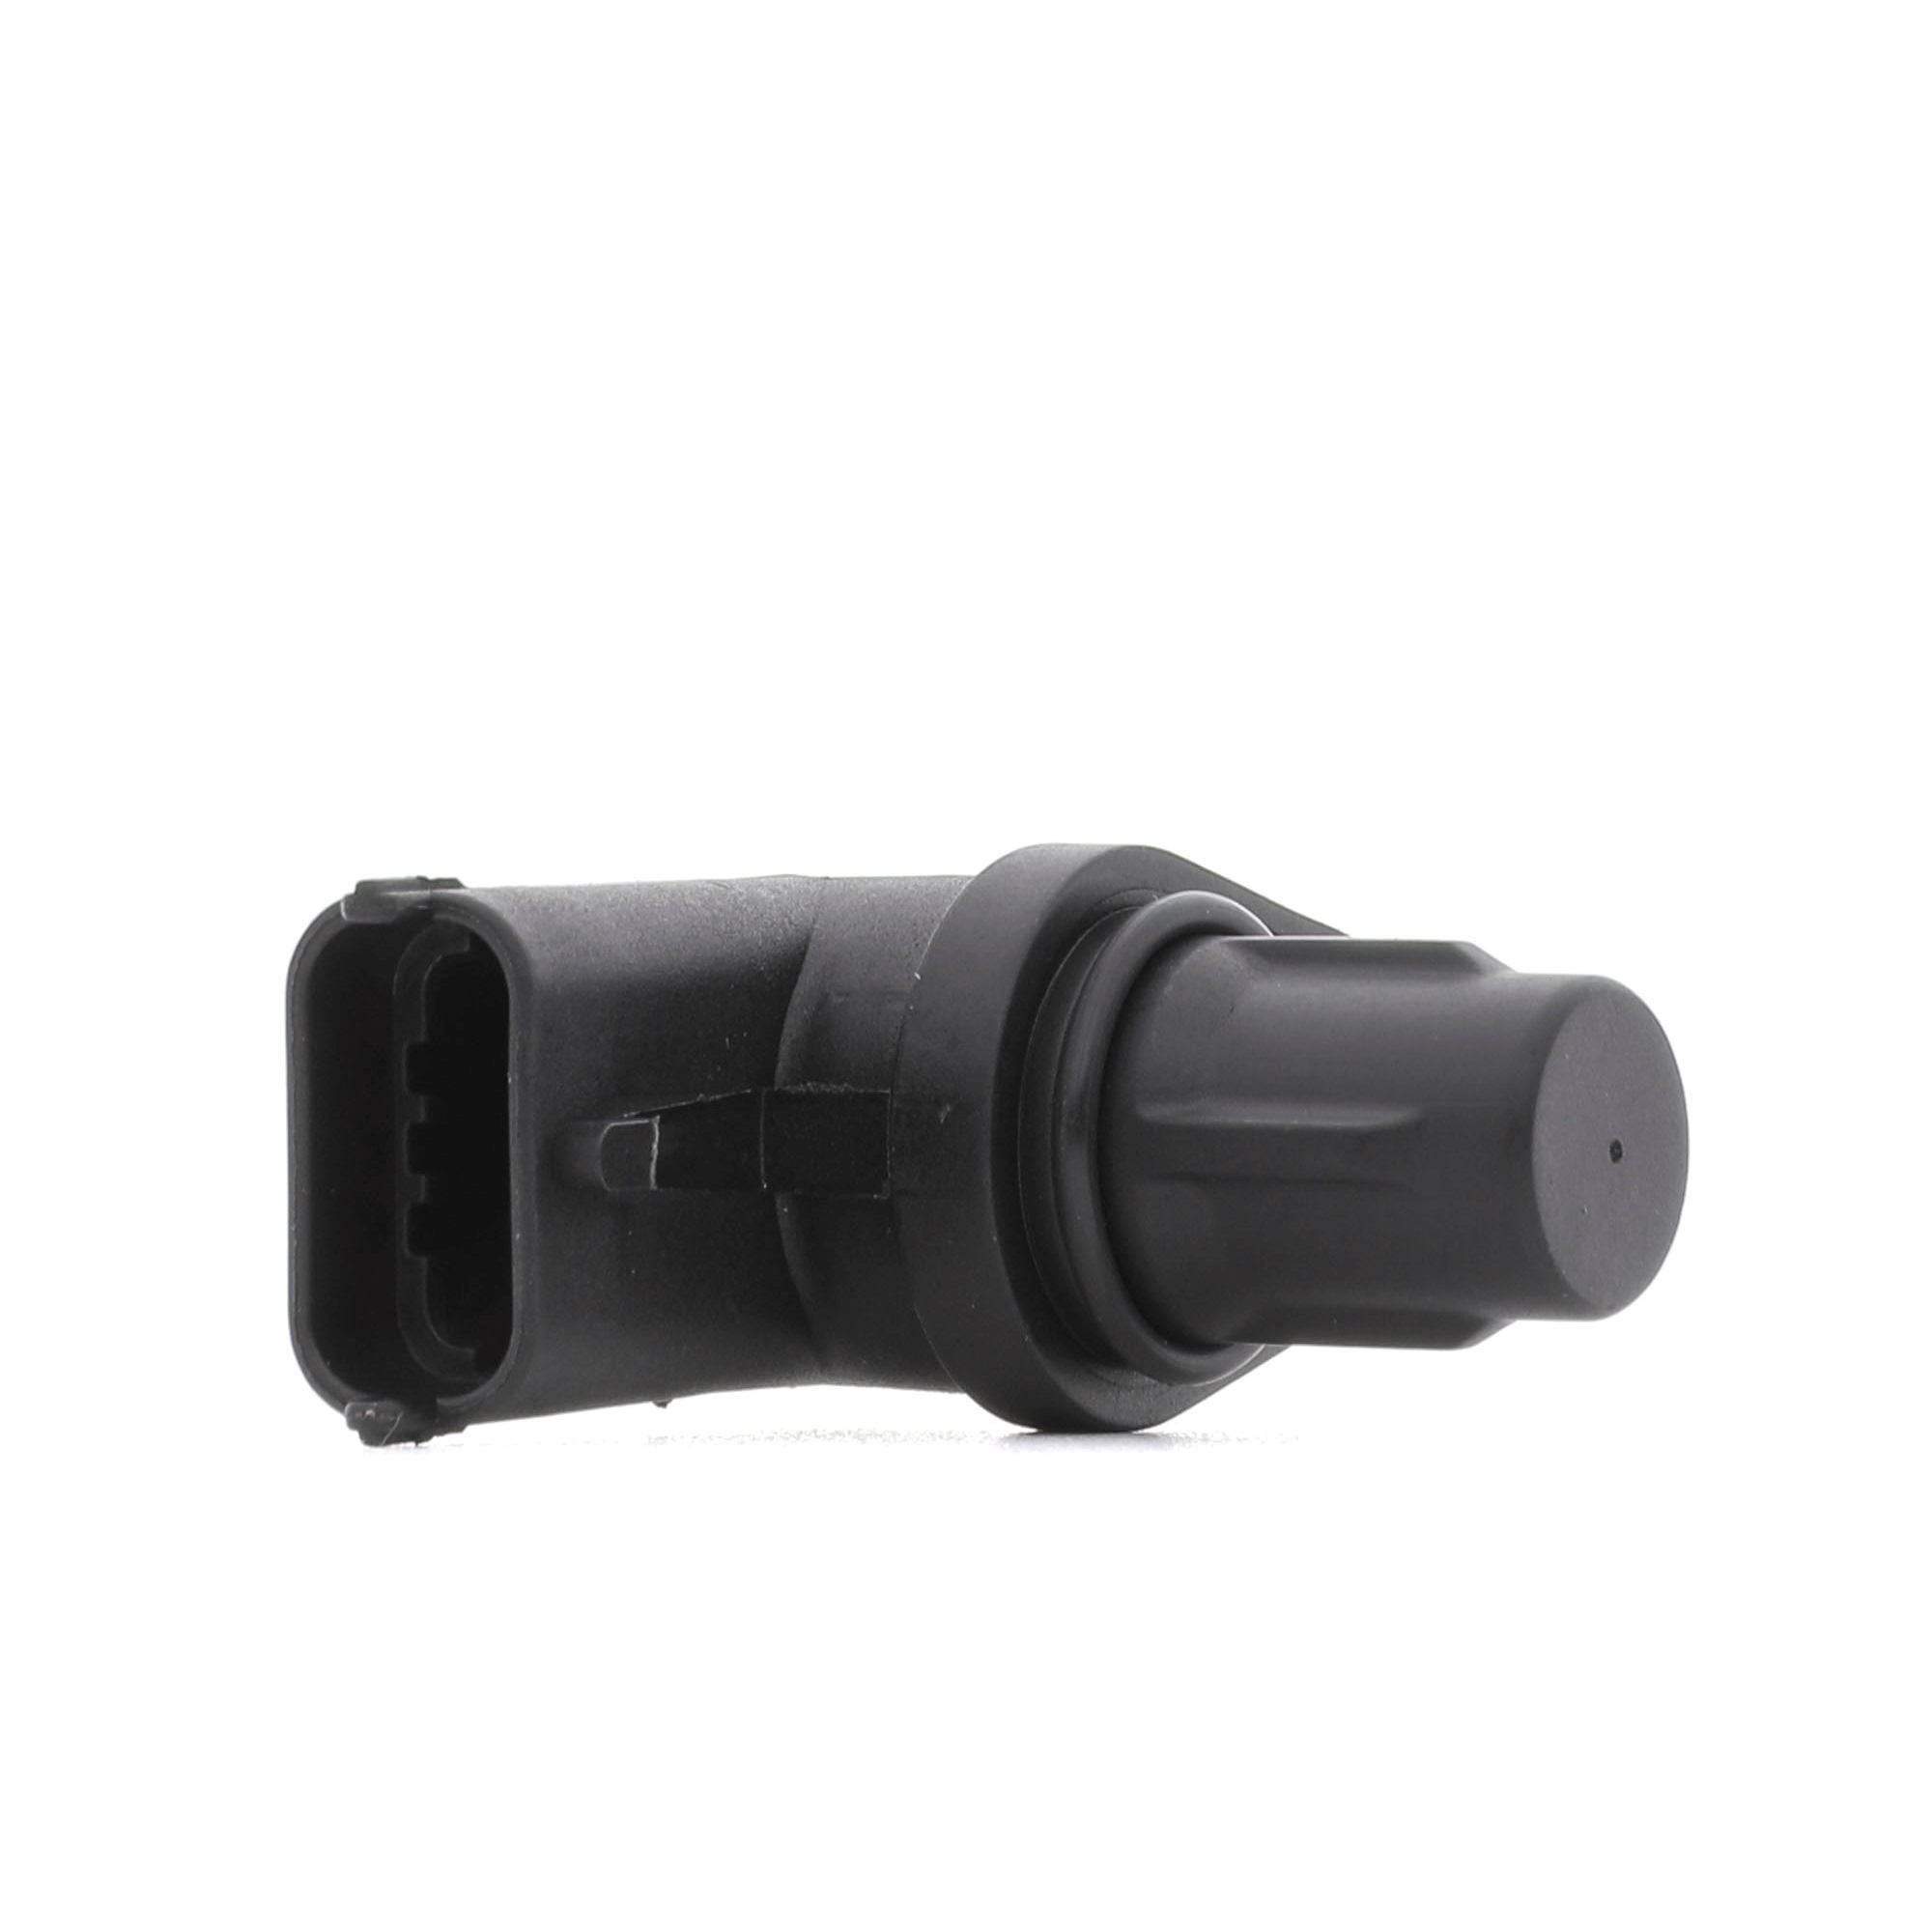 RIDEX Capteur, position d'arbre à cames OPEL,FORD,FIAT 3946S0063 55187973,05066856AA,05066856AB 05140332AA,5066856AA,5066856AB,5140332AA,1920JH